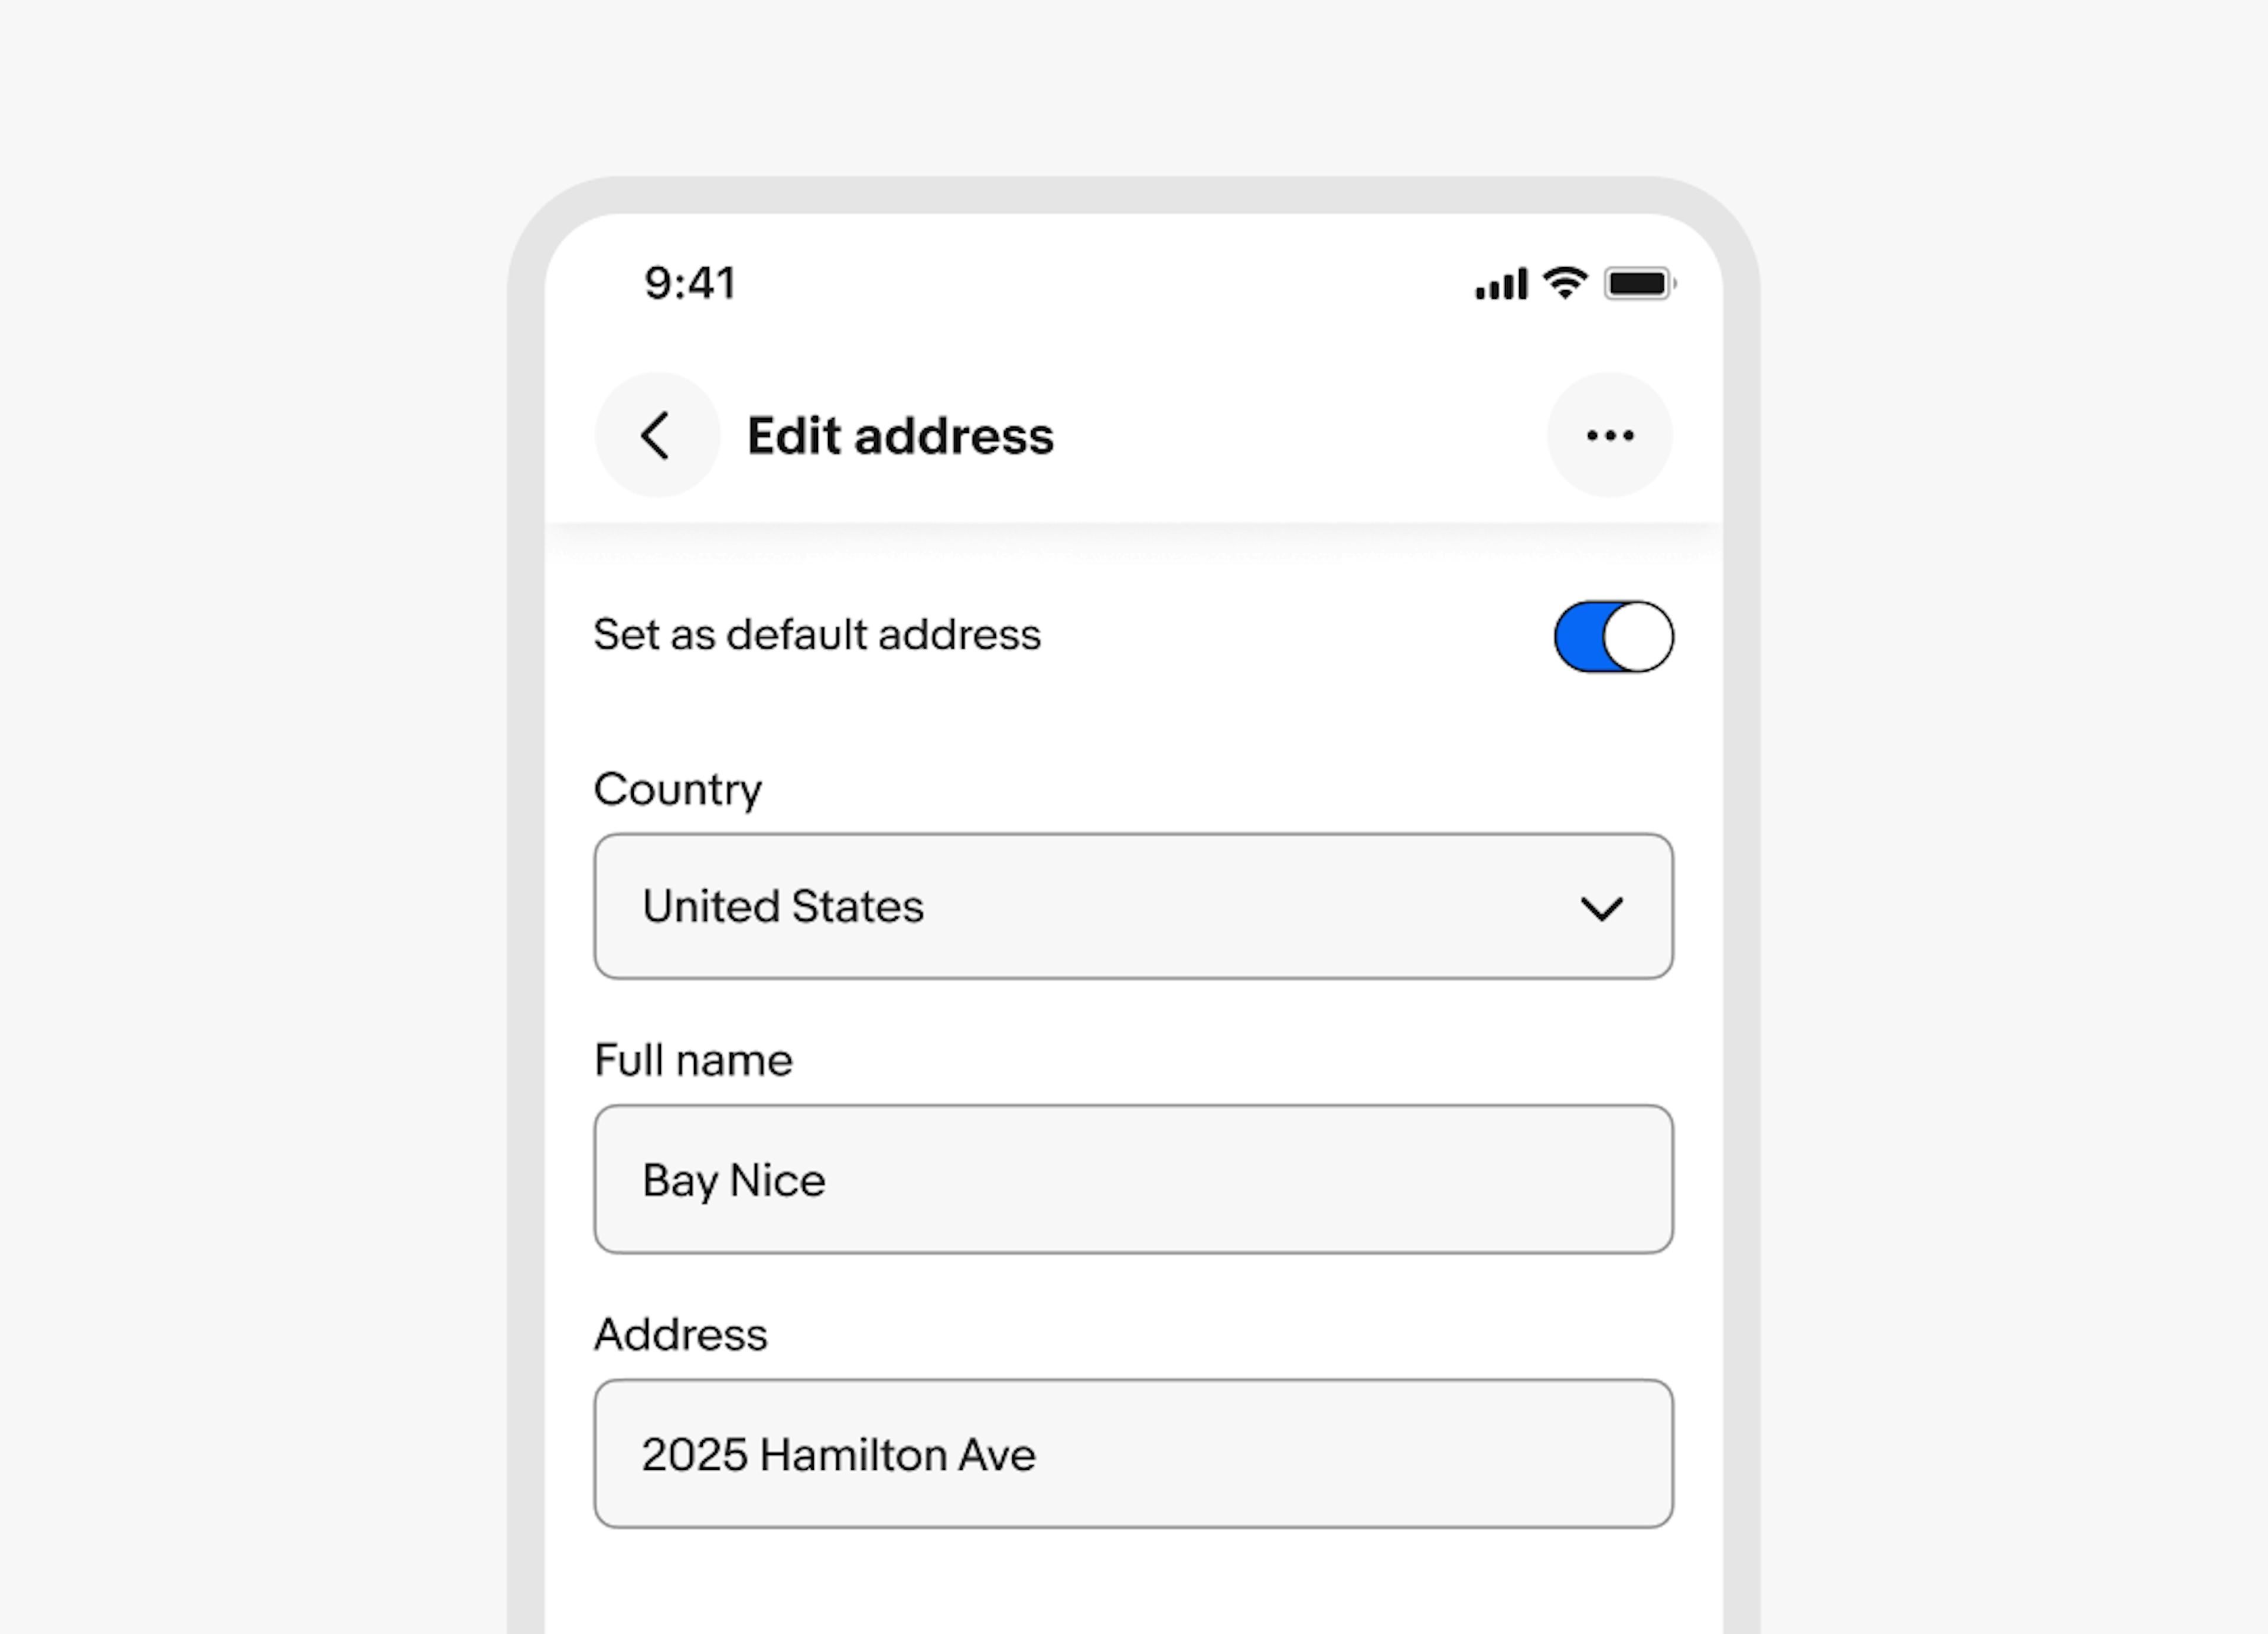 Edit address page with multiple inputs where the user can add or edit their information.